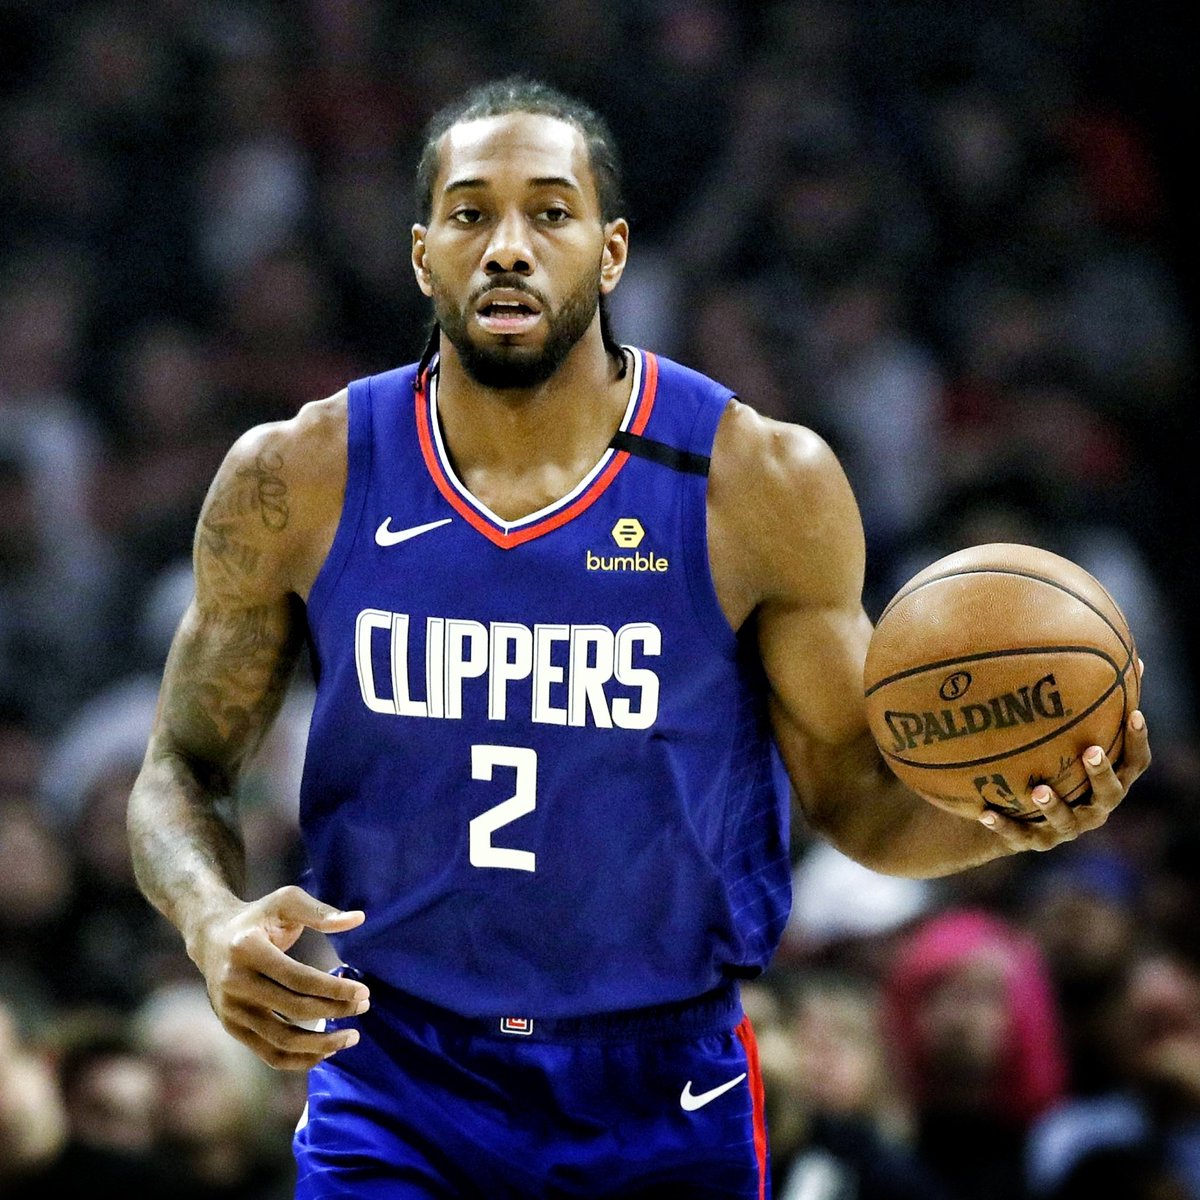 3: KAWHI LEONARD- 27 Points, 7 Rebounds, 5 Assists- Clippers: 44-20 (2nd in WC)- Probability to win MVP according to basketball-reference: 2.1% (6th)